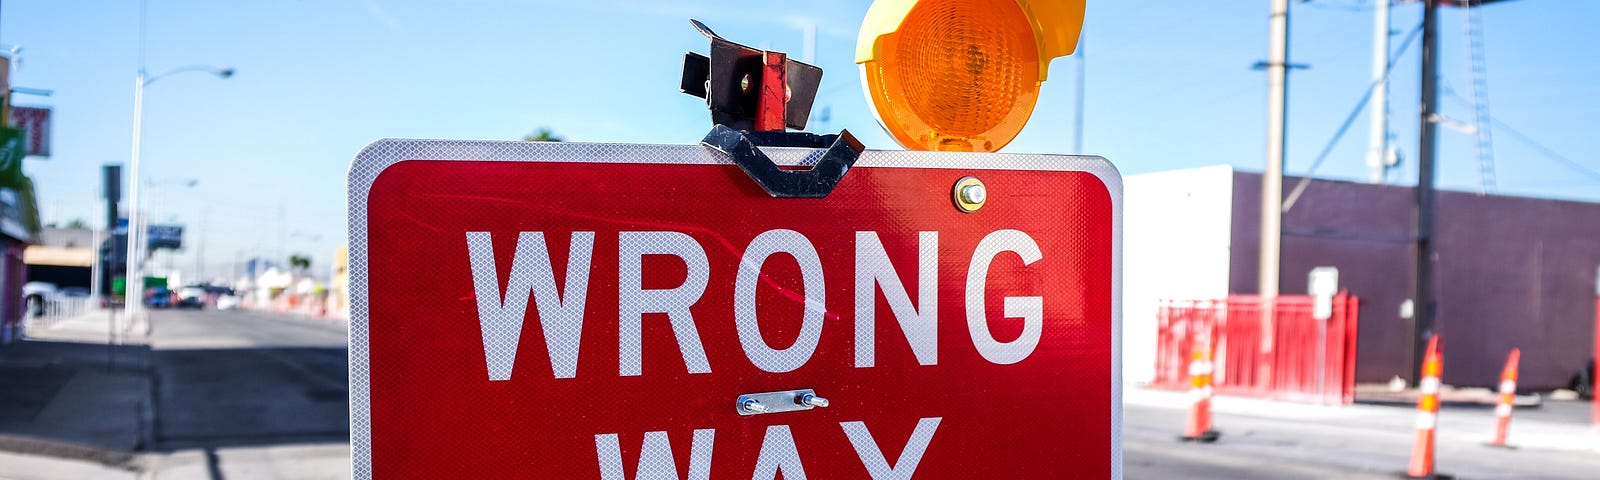 Wrong Way sign in a construction zone.